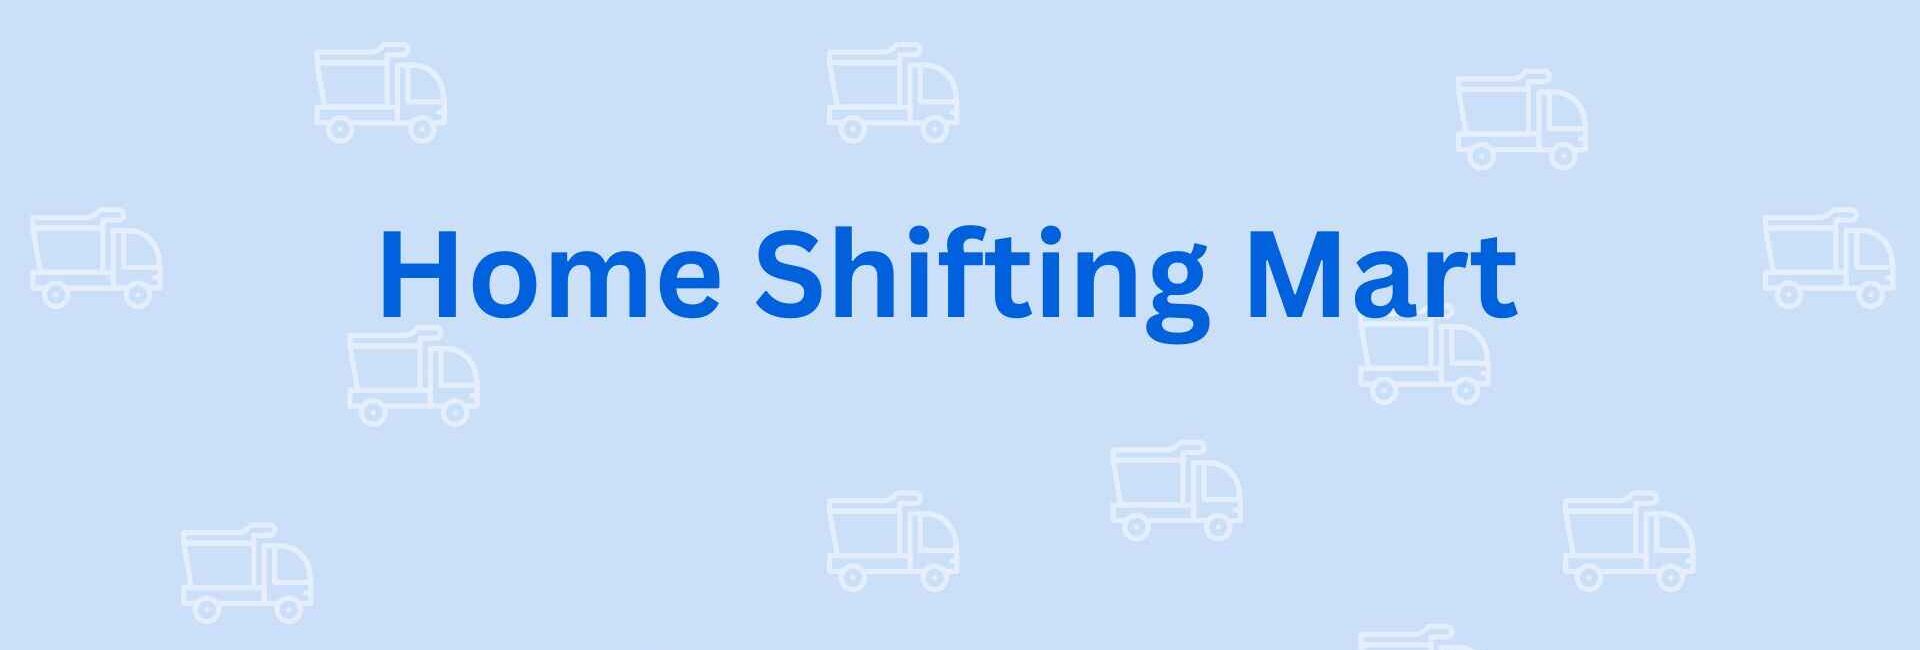 Home Shifting Mart - Packers and Movers in Noida